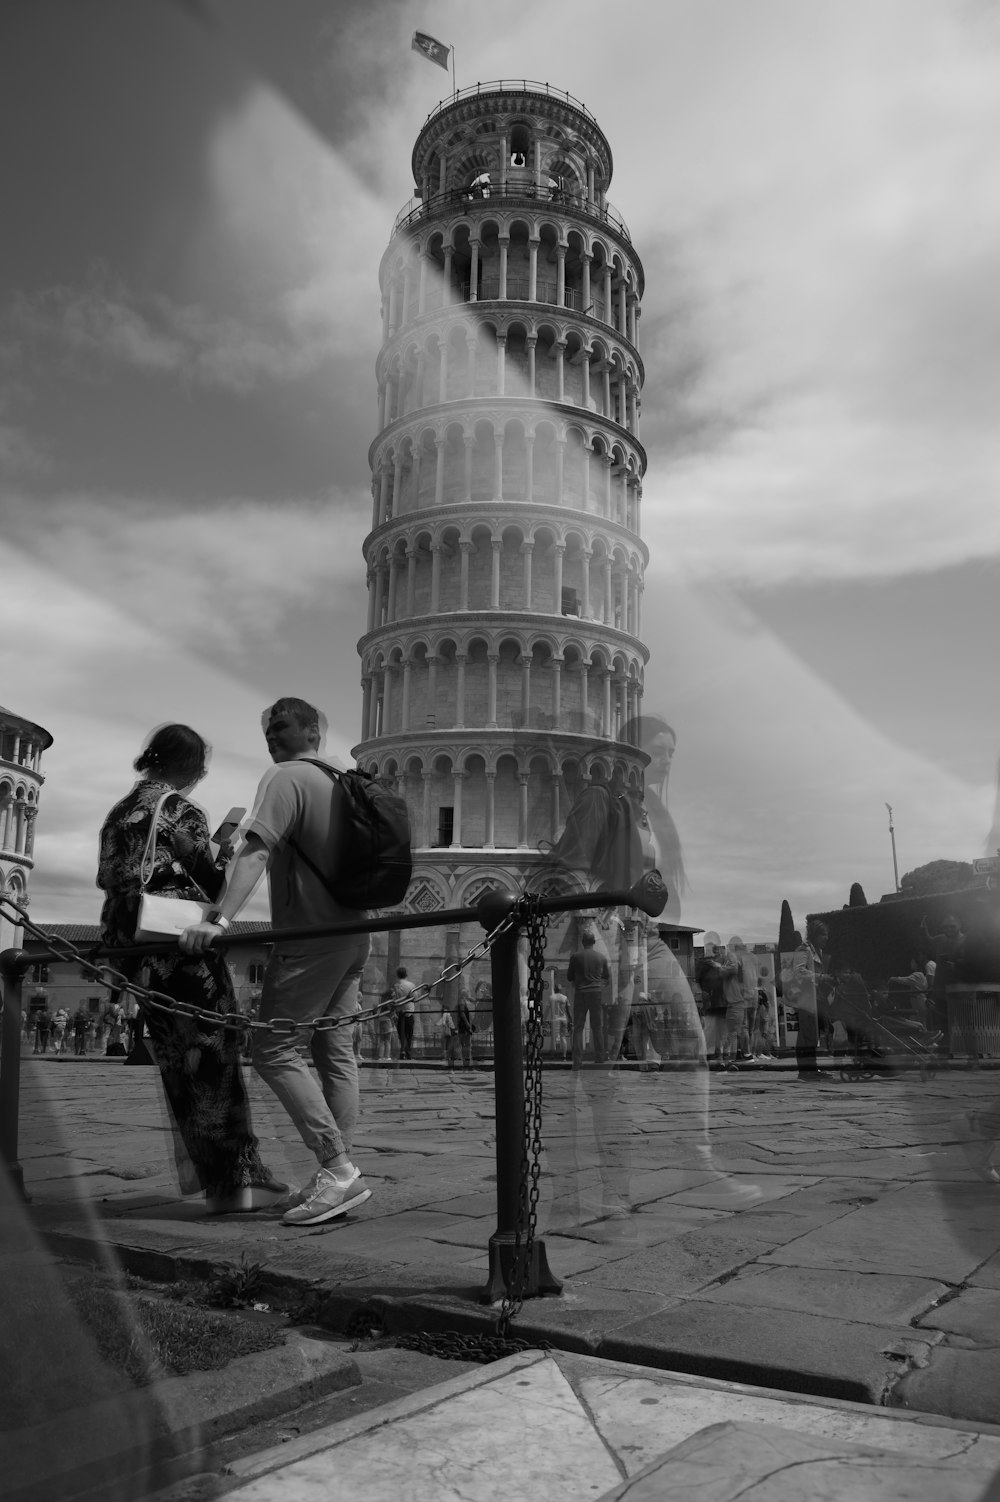 a man and woman walking in front of a large tower with Leaning Tower of Pisa in the background